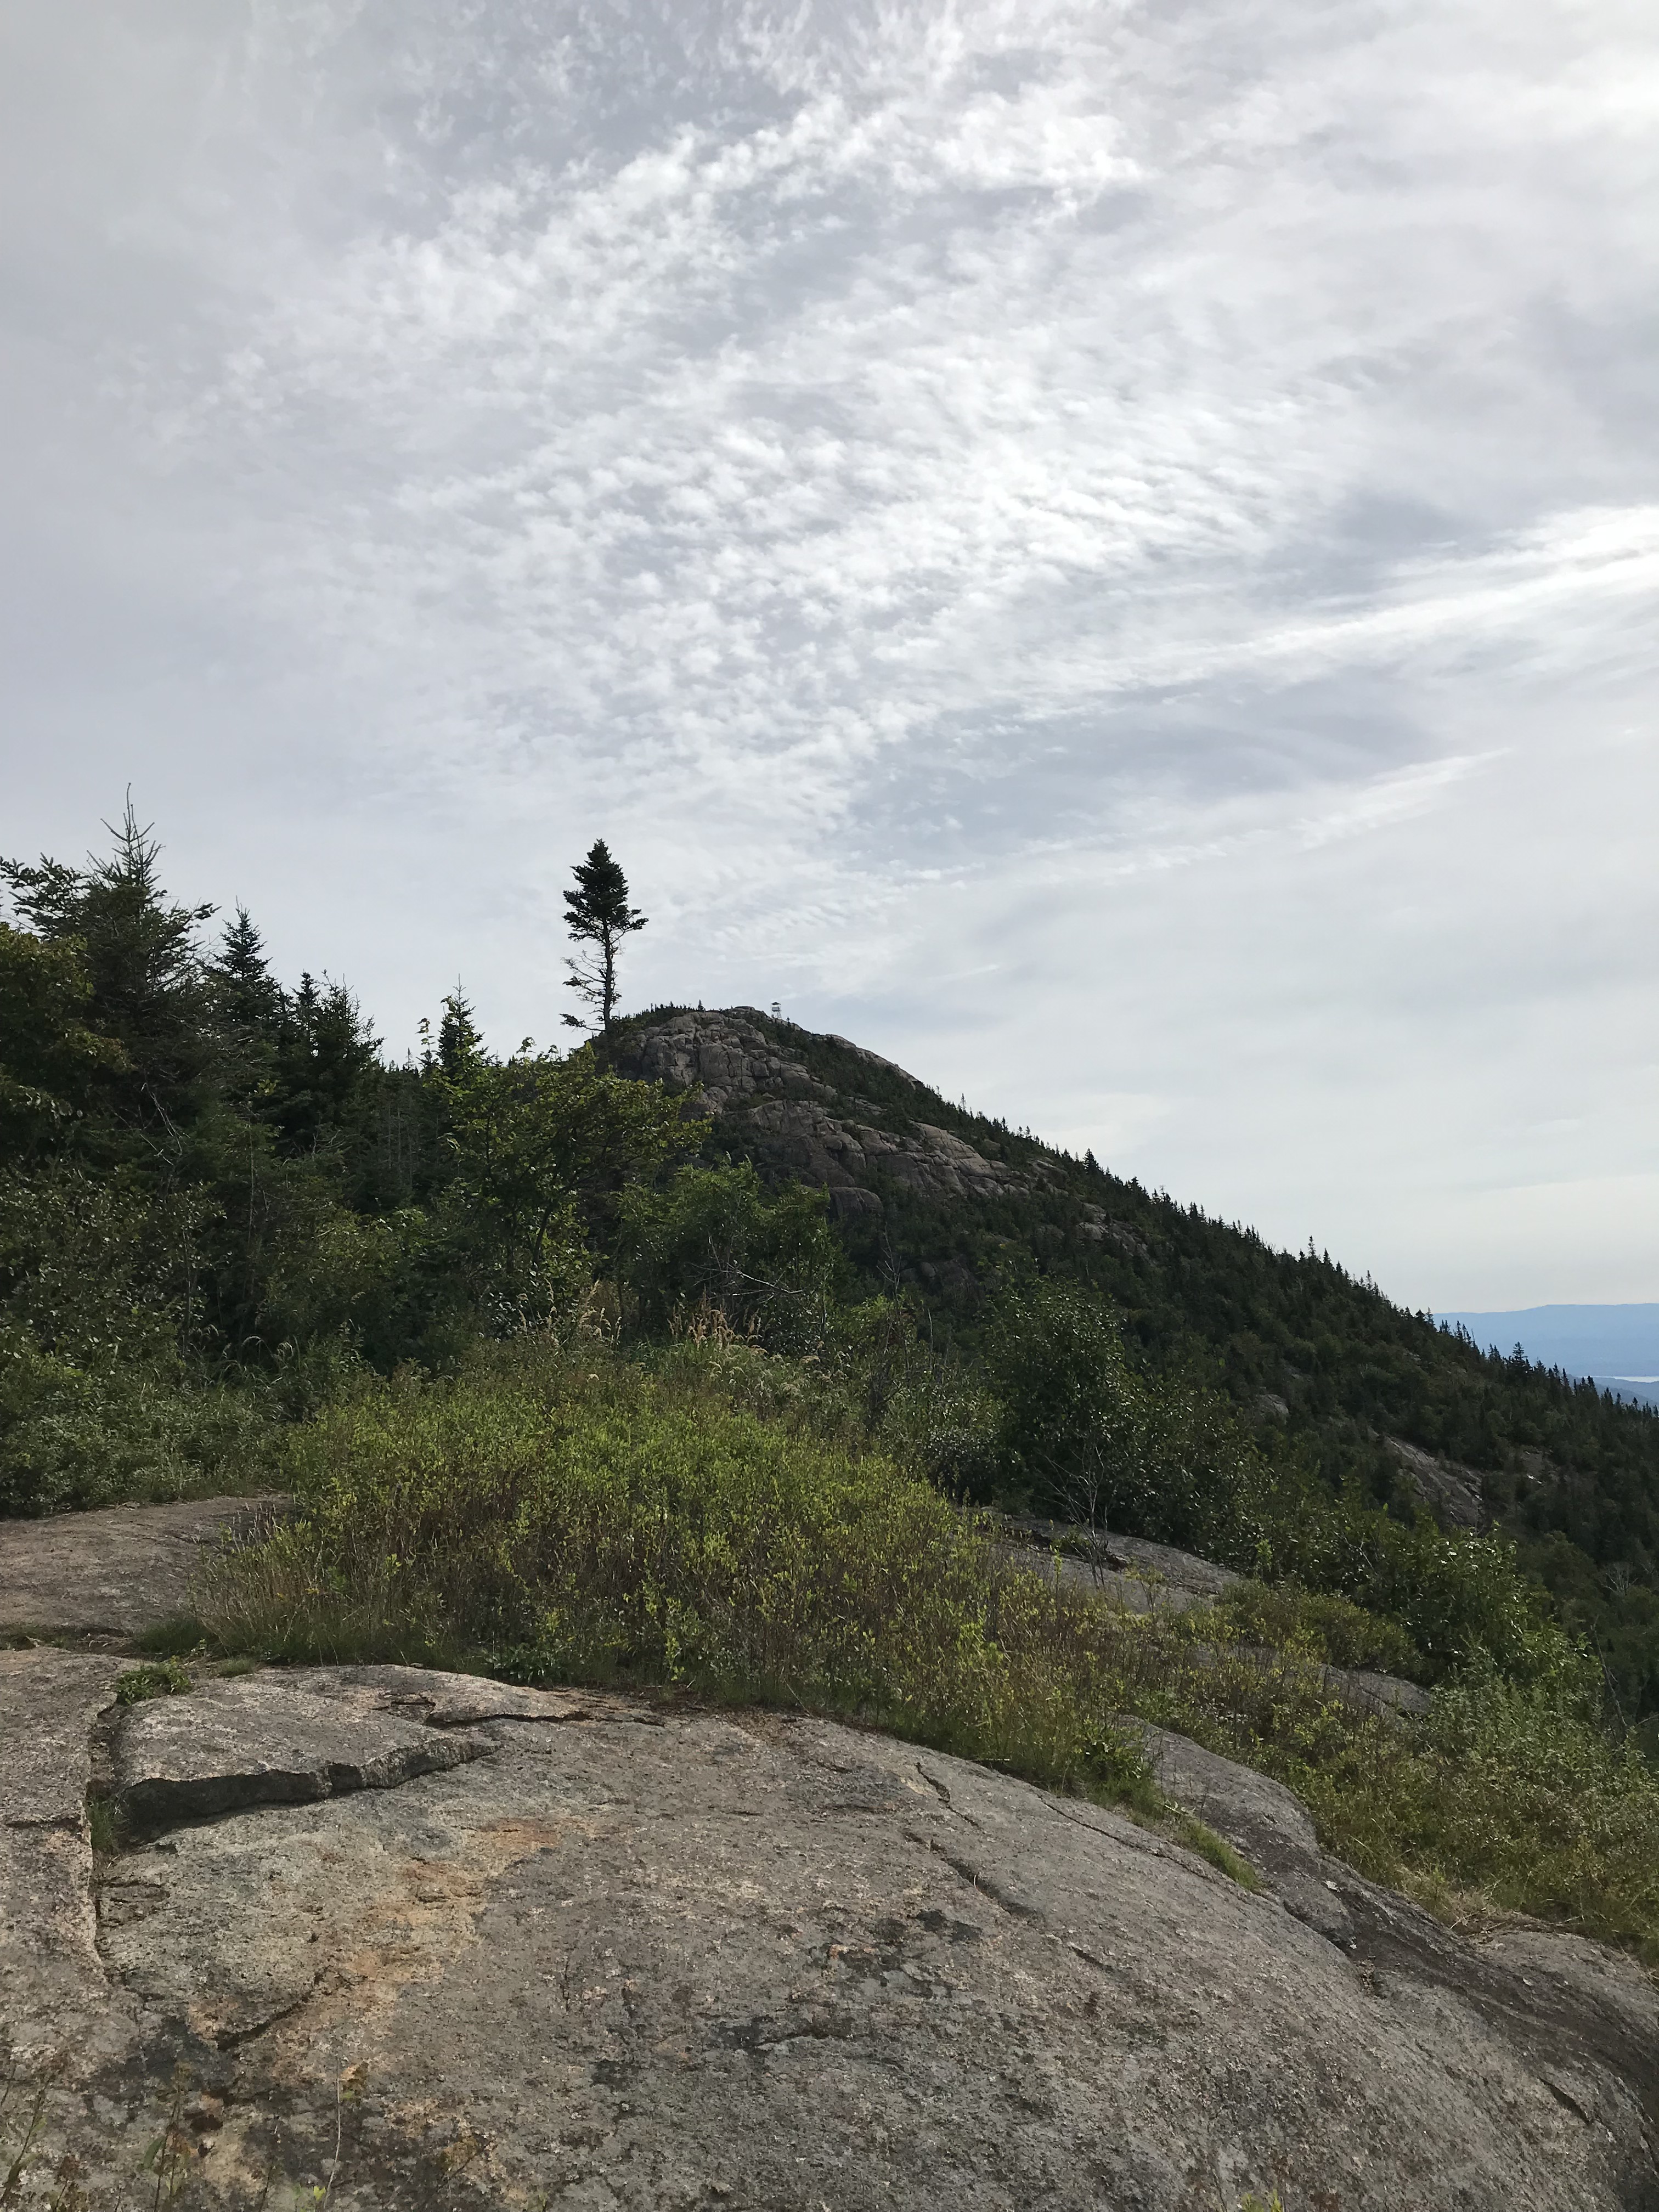 Summit of Hurricane Mountain in the near distance